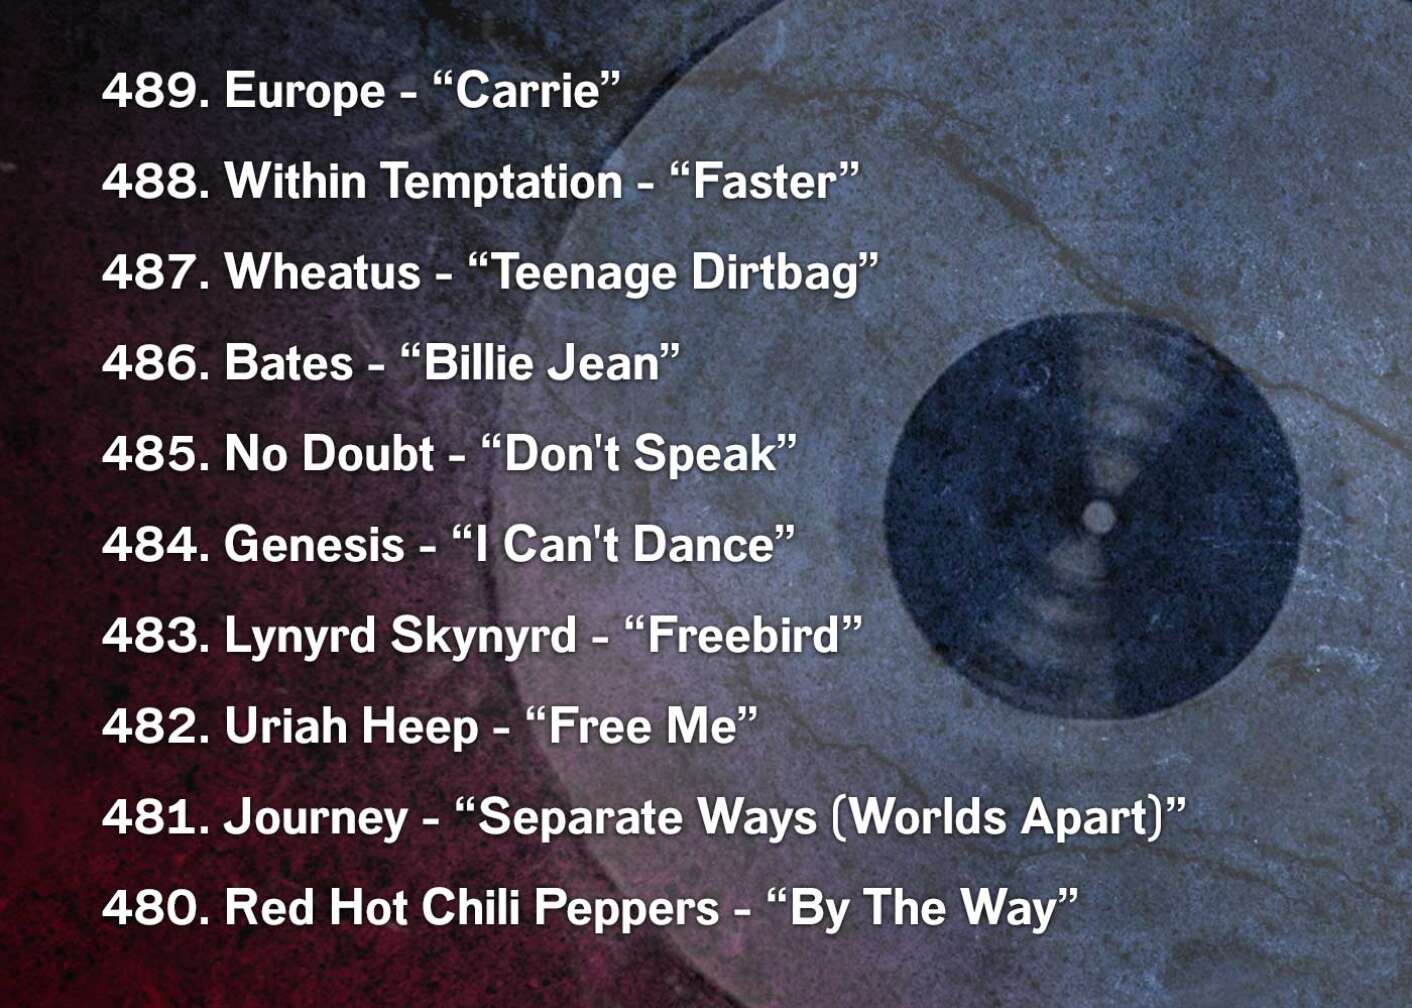 489. Europe - “Carrie” 488. Within Temptation - “Faster” 487. Wheatus - “Teenage Dirtbag” 486. Bates - “Billie Jean” 485. No Doubt - “Don't Speak” 484. Genesis - “I Can't Dance” 483. Lynyrd Skynyrd - “Freebird” 482. Uriah Heep - “Free Me” 481. Journey - “Separate Ways (Worlds Apart)” 480. Red Hot Chili Peppers - “By The Way”